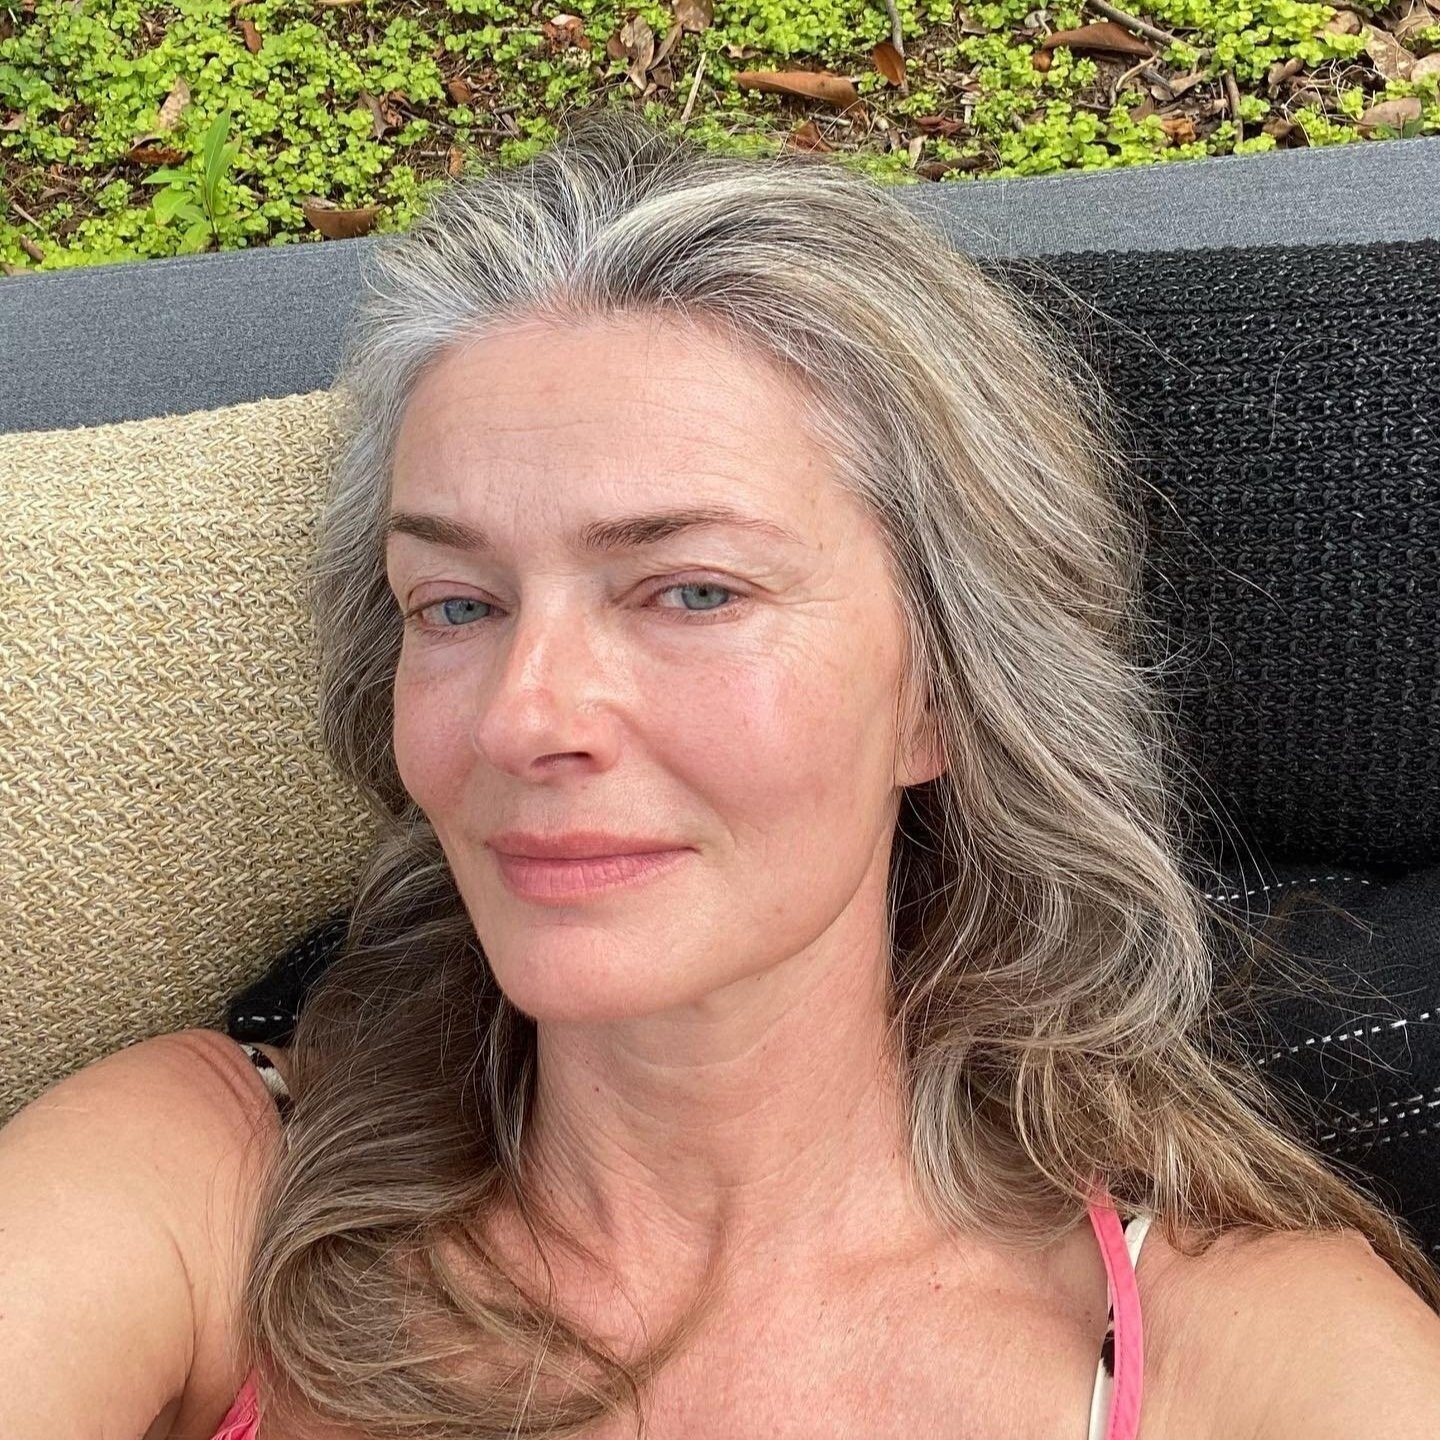 At 58, supermodel Paulina Porizkova has found a new fandom by sharing unfiltered thoughts, as well as unfiltered images of her face, on Instagram. &quot;I know market-wise, I am not considered as beautiful as I once was,&quot; she tells @denise_k._ i